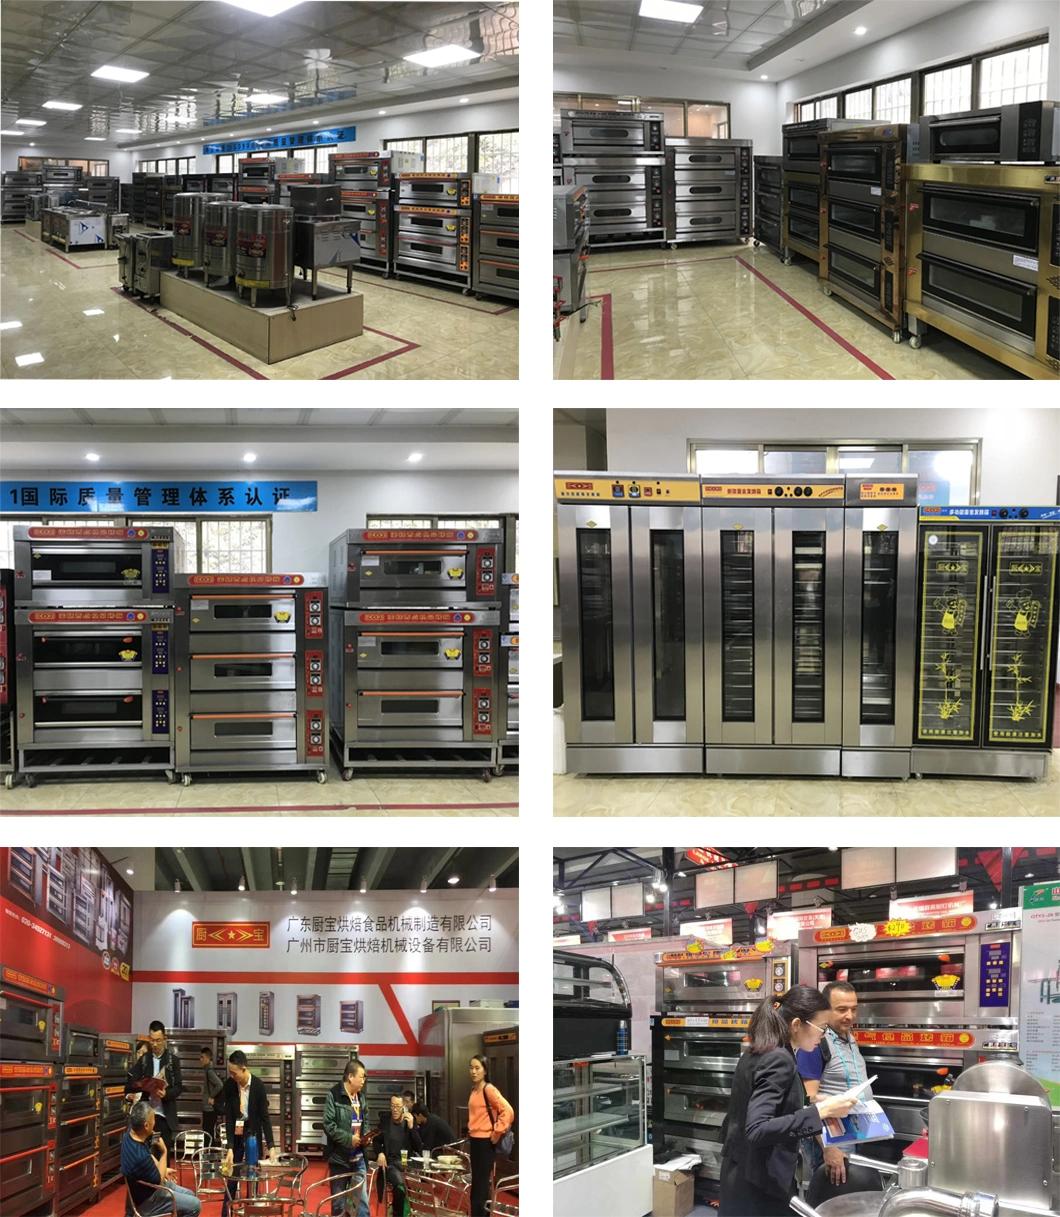 1 Deck 2 Trays Electric Oven for Commercial Kitchen Baking Equipment Food Machinery Bakery Machine Food Oven